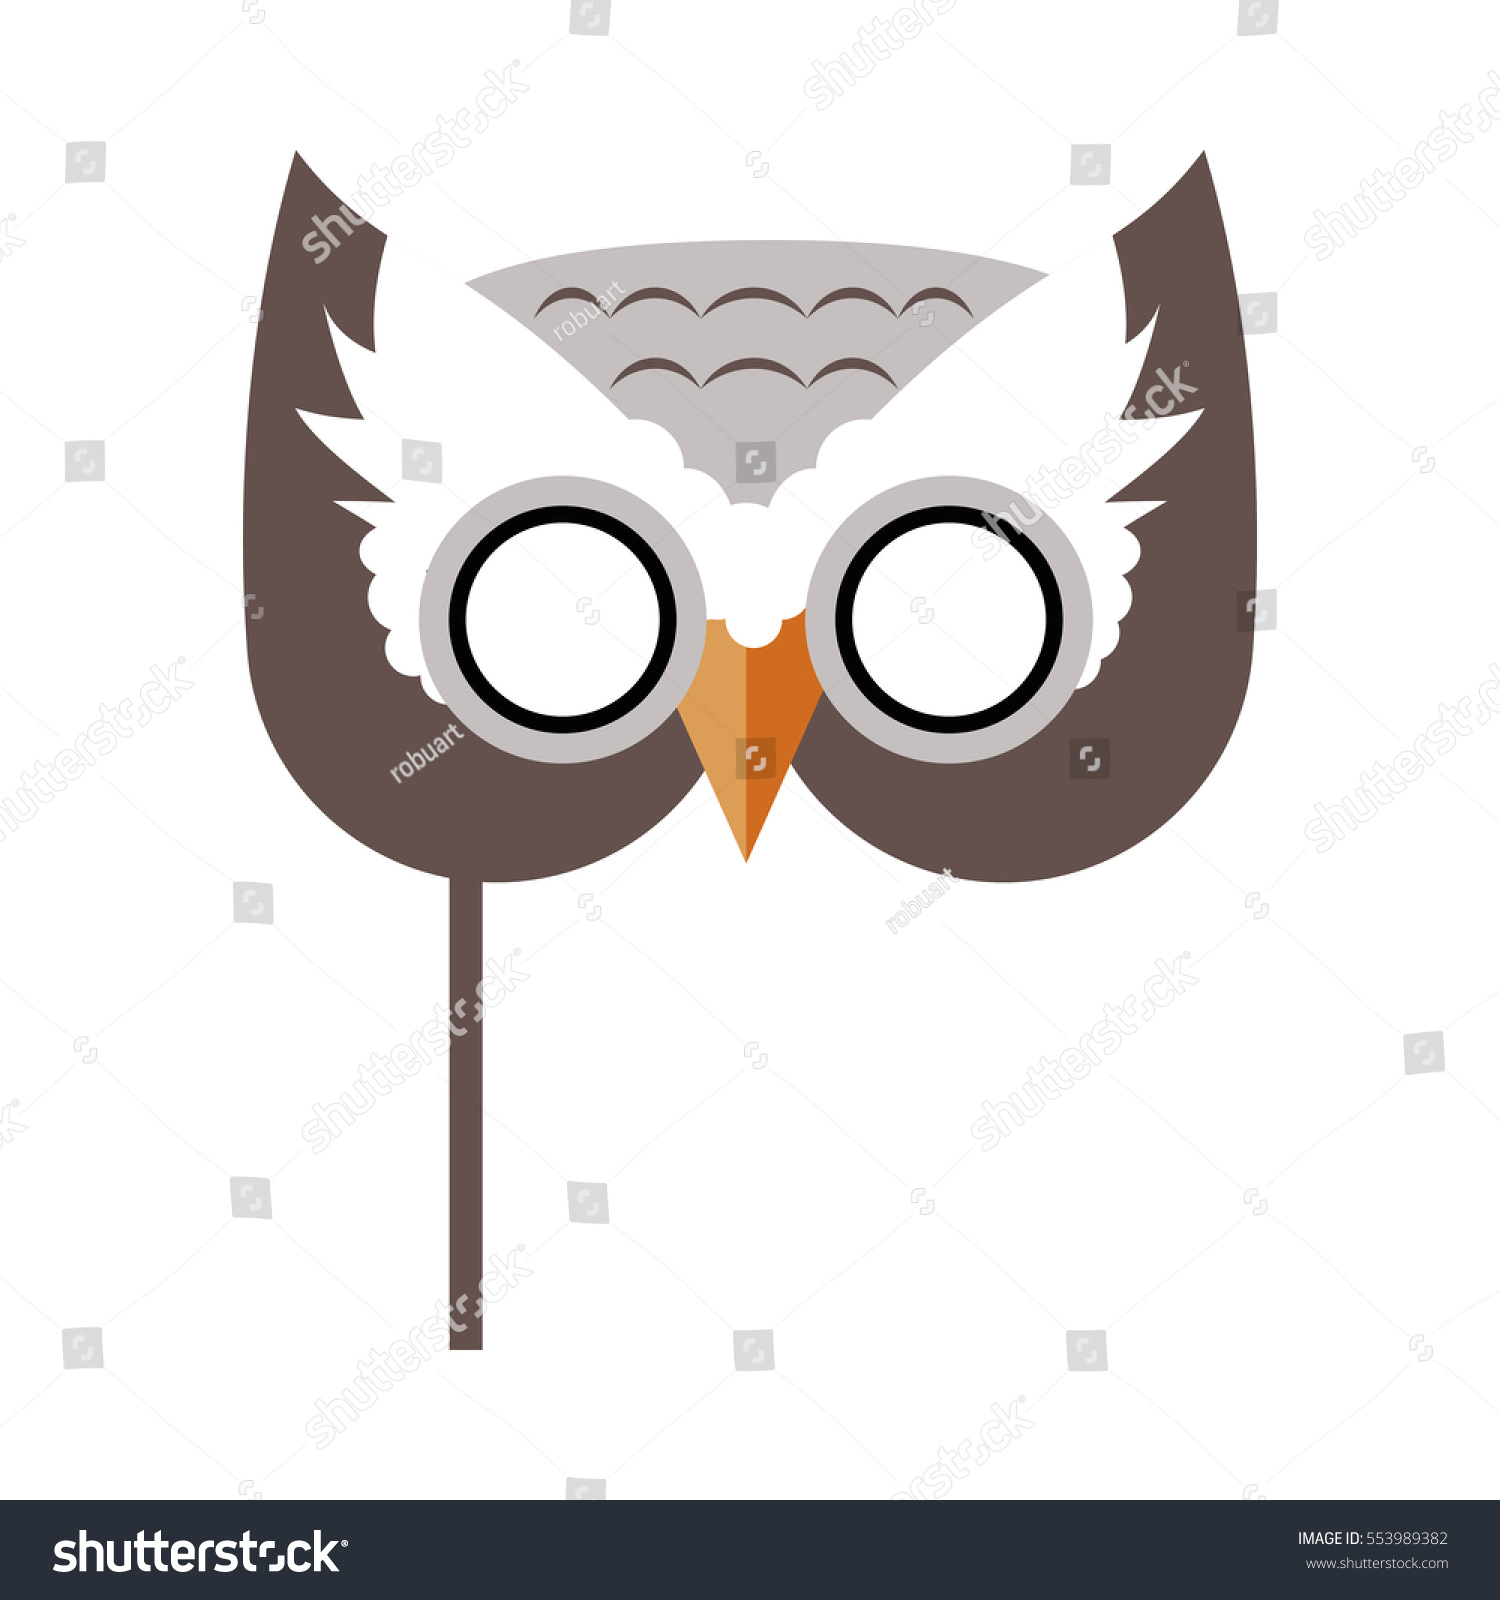 SVG of Owl bird carnival mask vector illustration in flat. Binocular vision, binaural hearing bird. Childish masquerade mask isolated on white. New Year masque for festivals, holiday dress code for kids svg